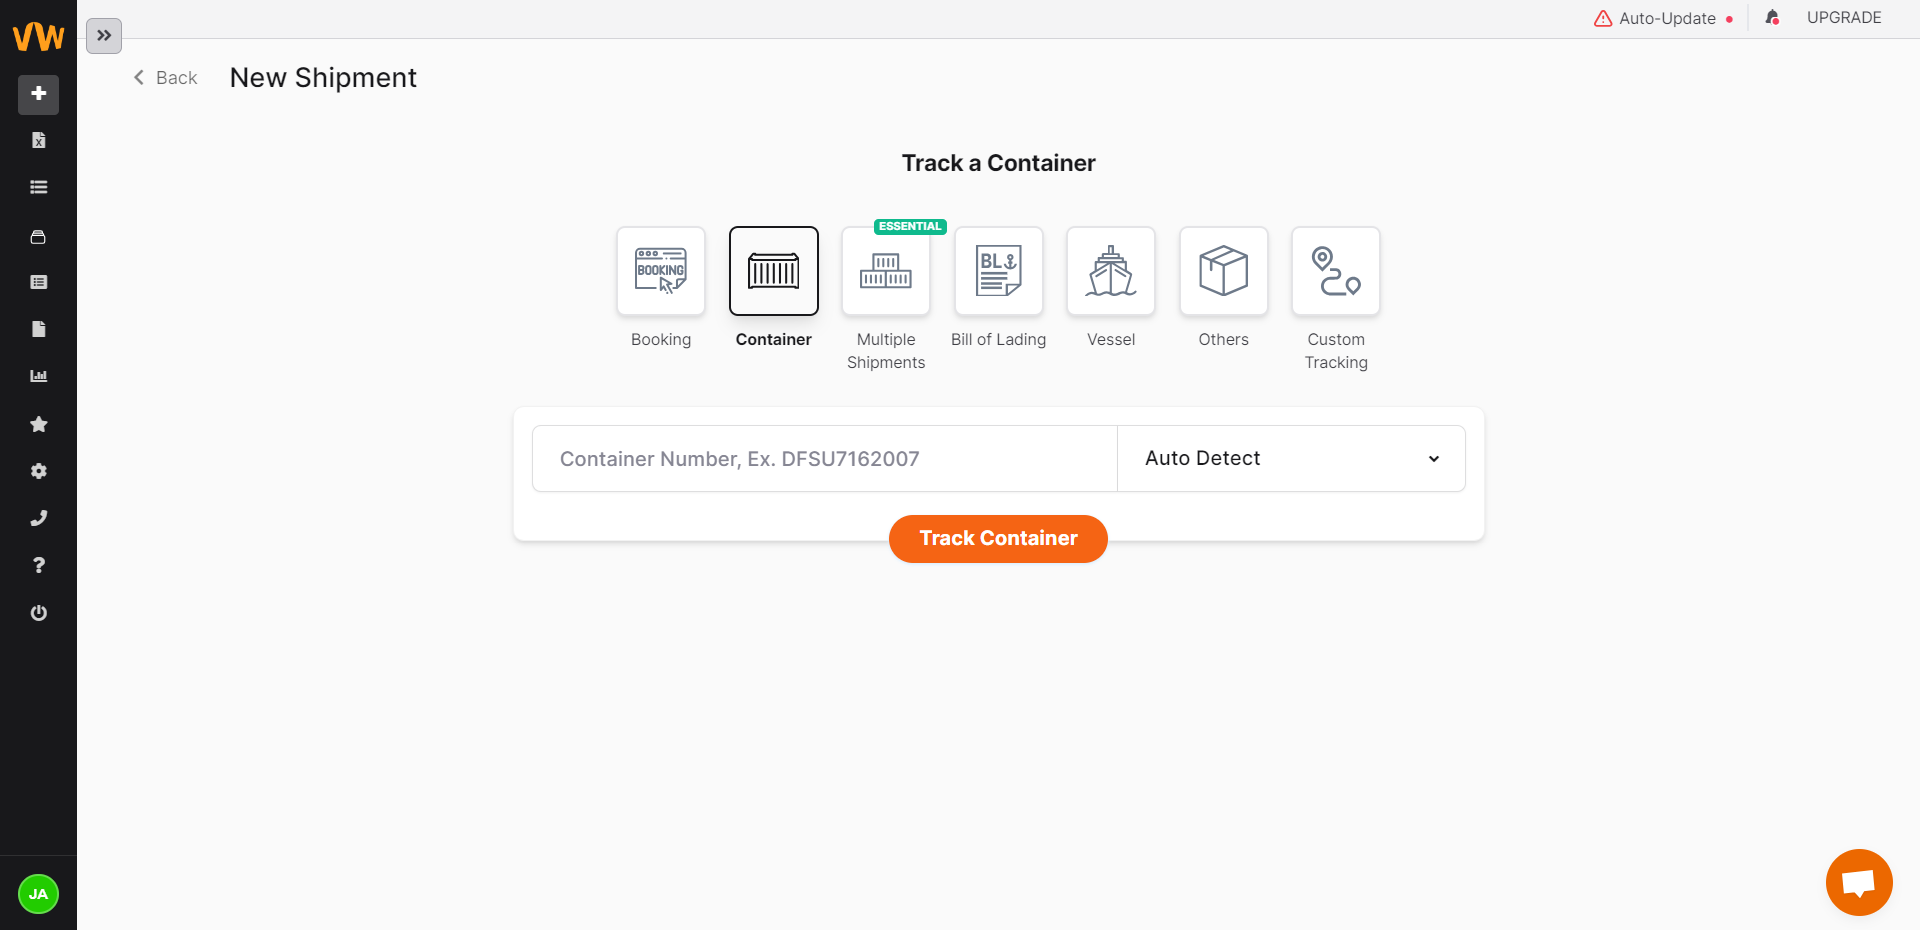 Different ways of adding shipments to track. (except the integration for auto-tracking))